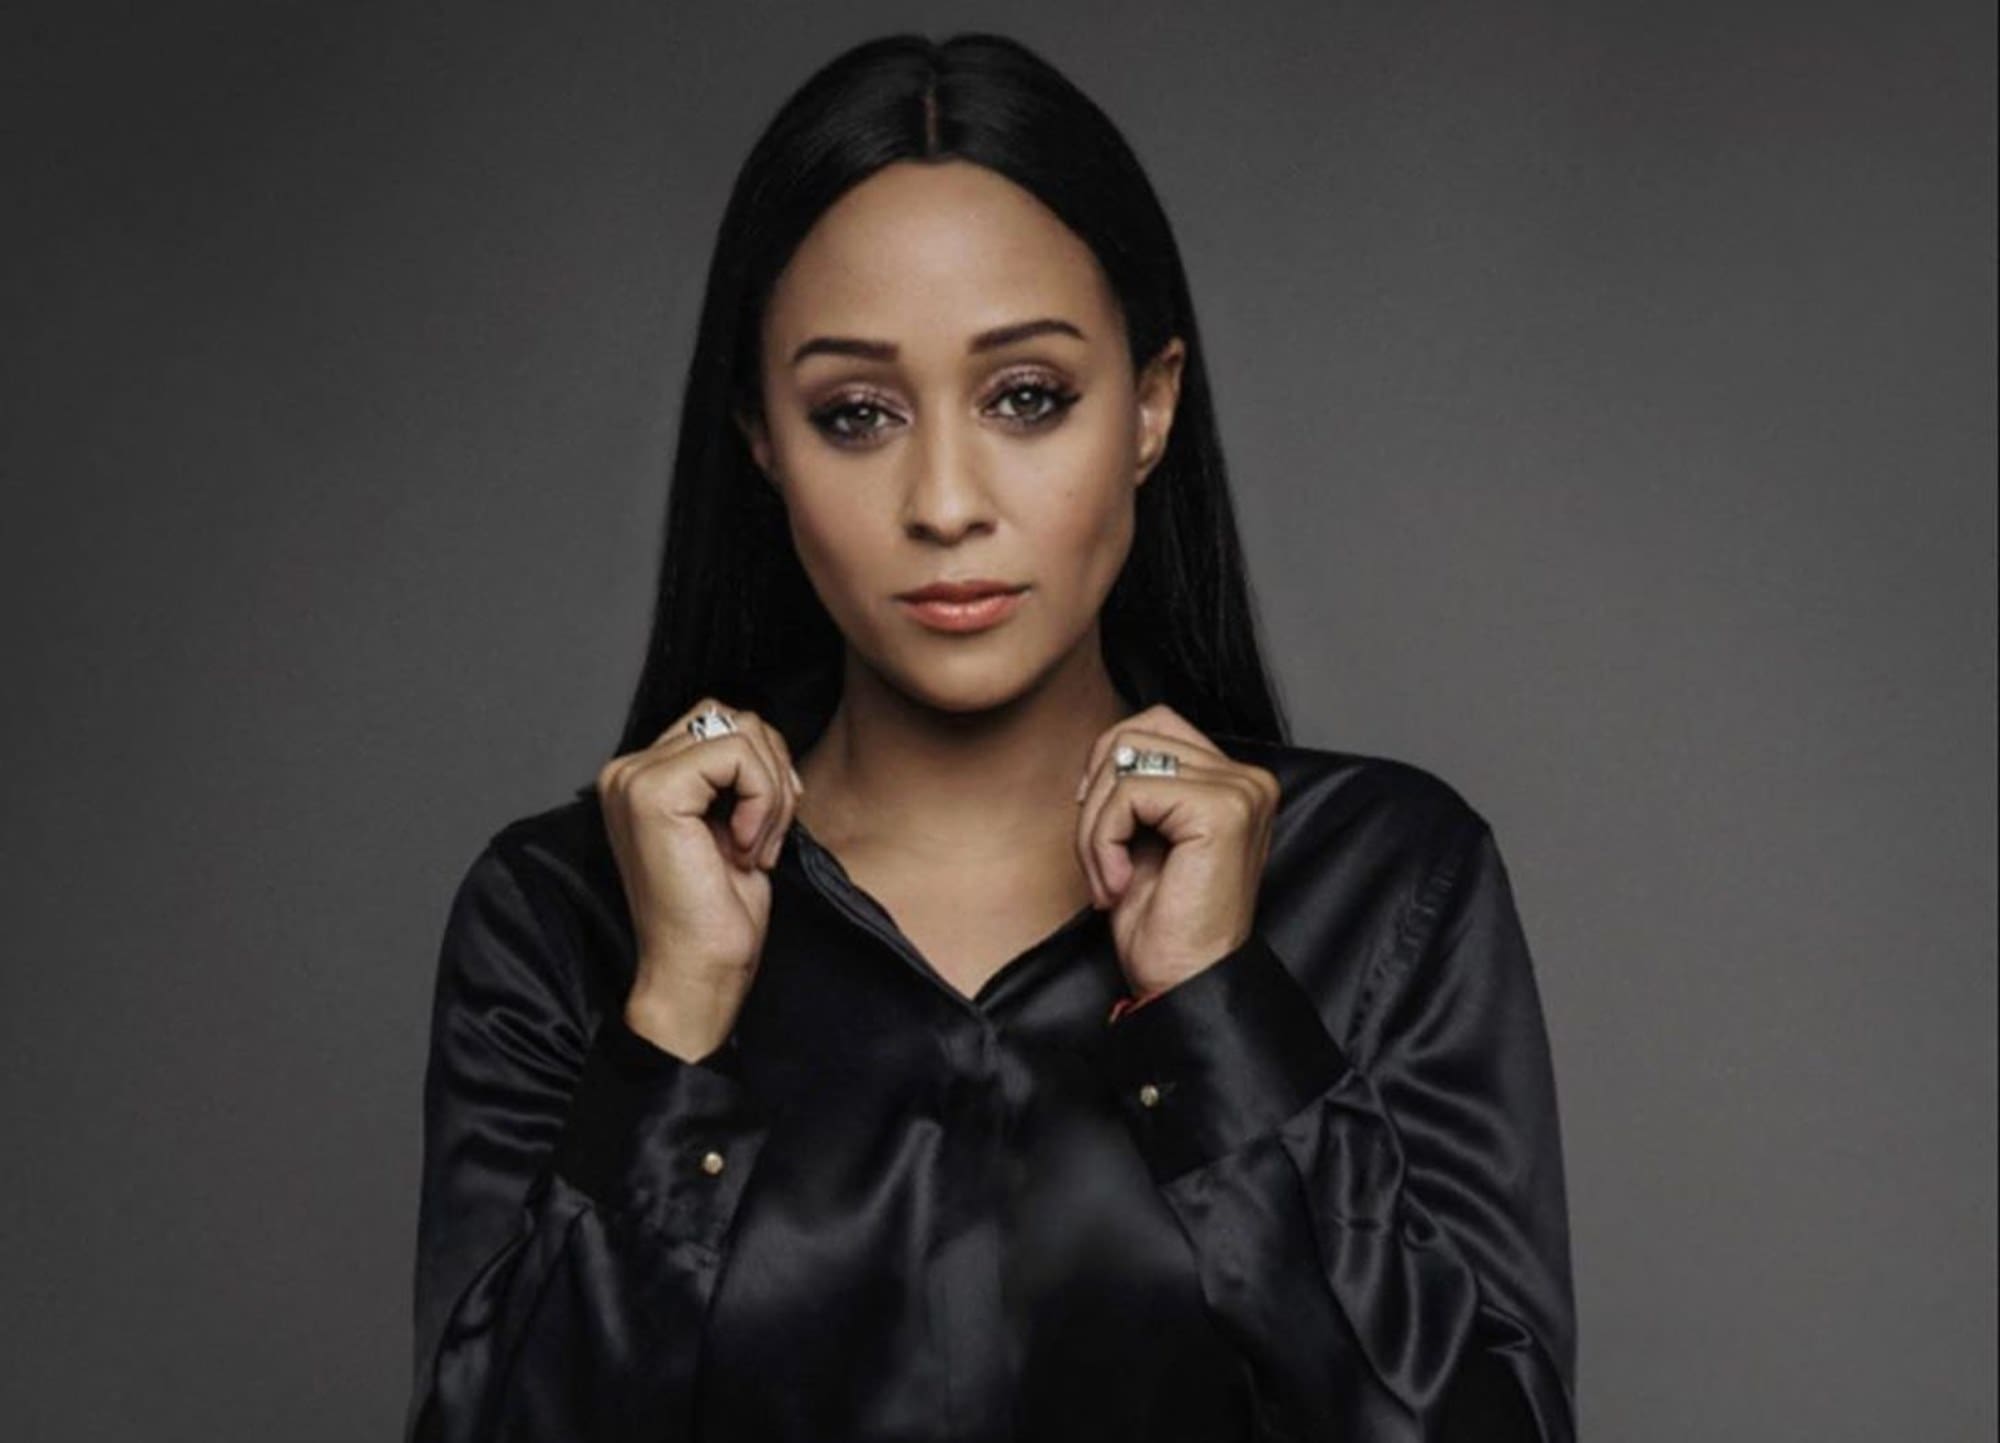 Breaking News From Doubledongdivas Tia Mowry Flaunts Her Stunning Beach Body In This Video As